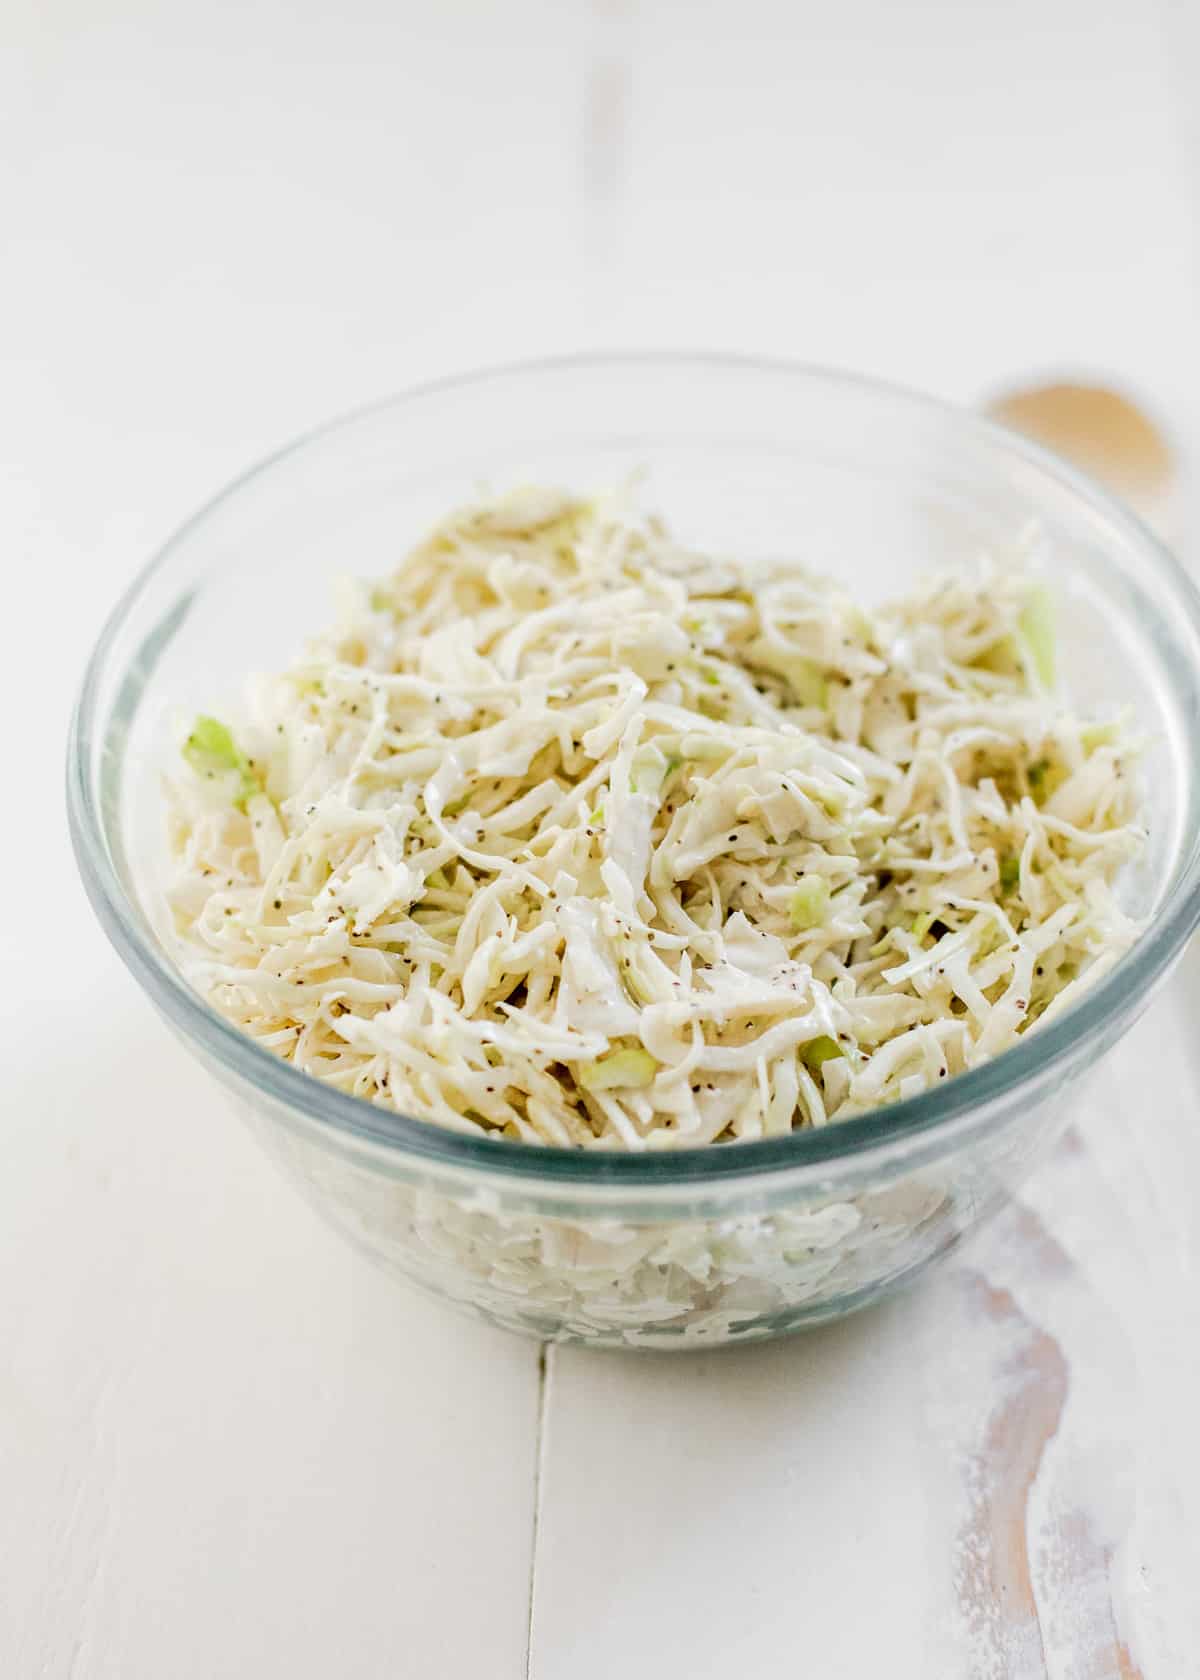 glass bowl of coleslaw with green cabbage